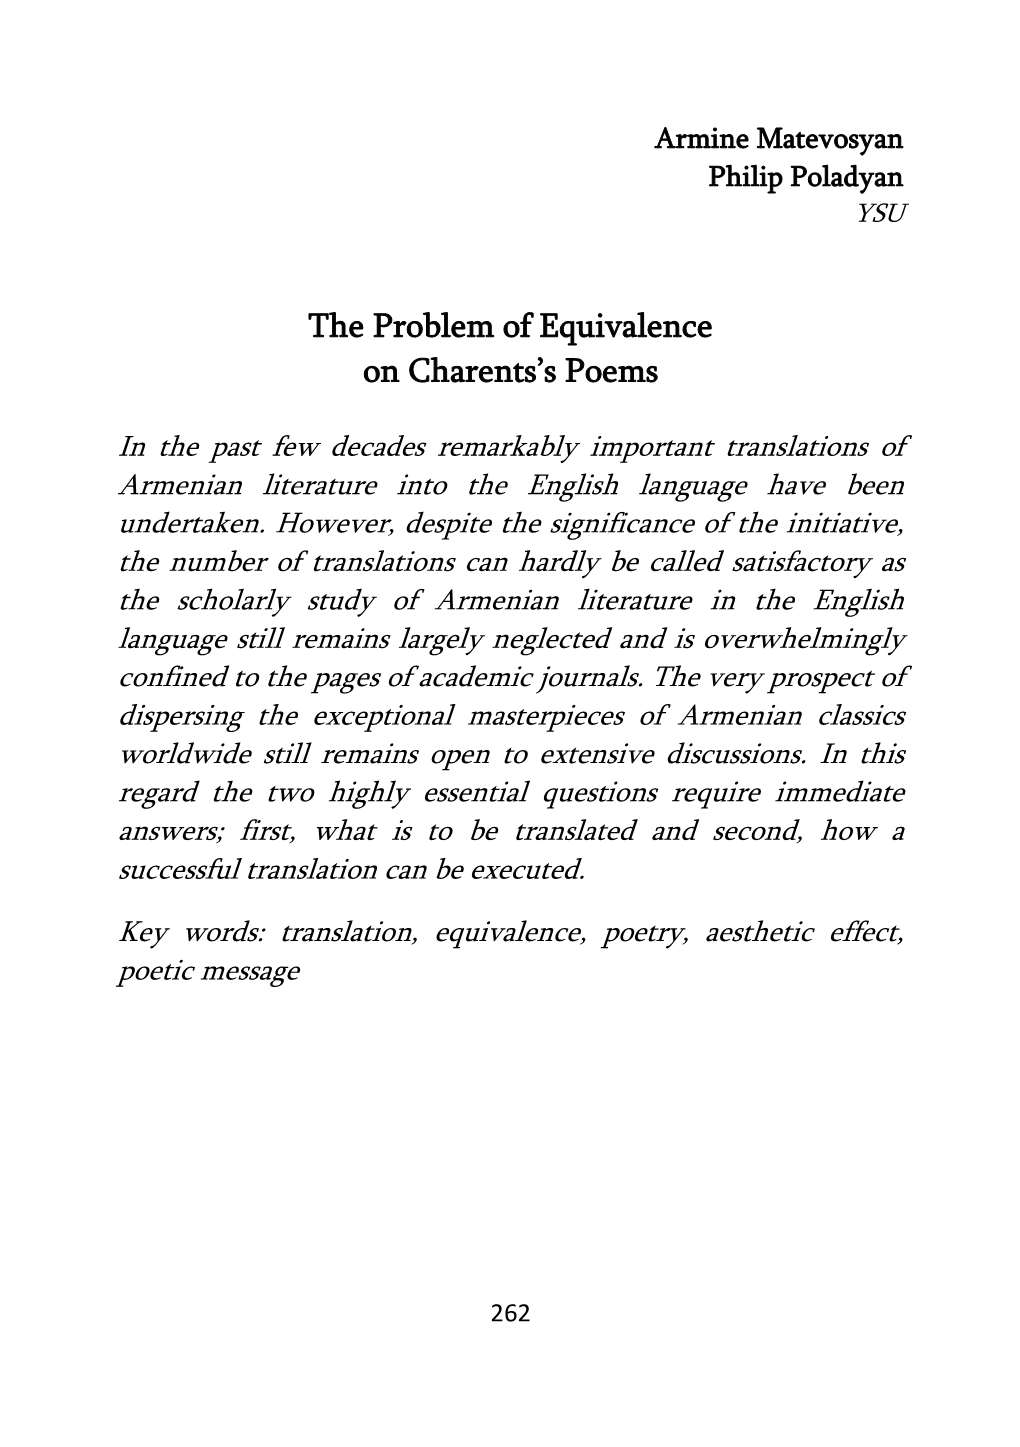 The Problem of Equivalence on Charents's Poems